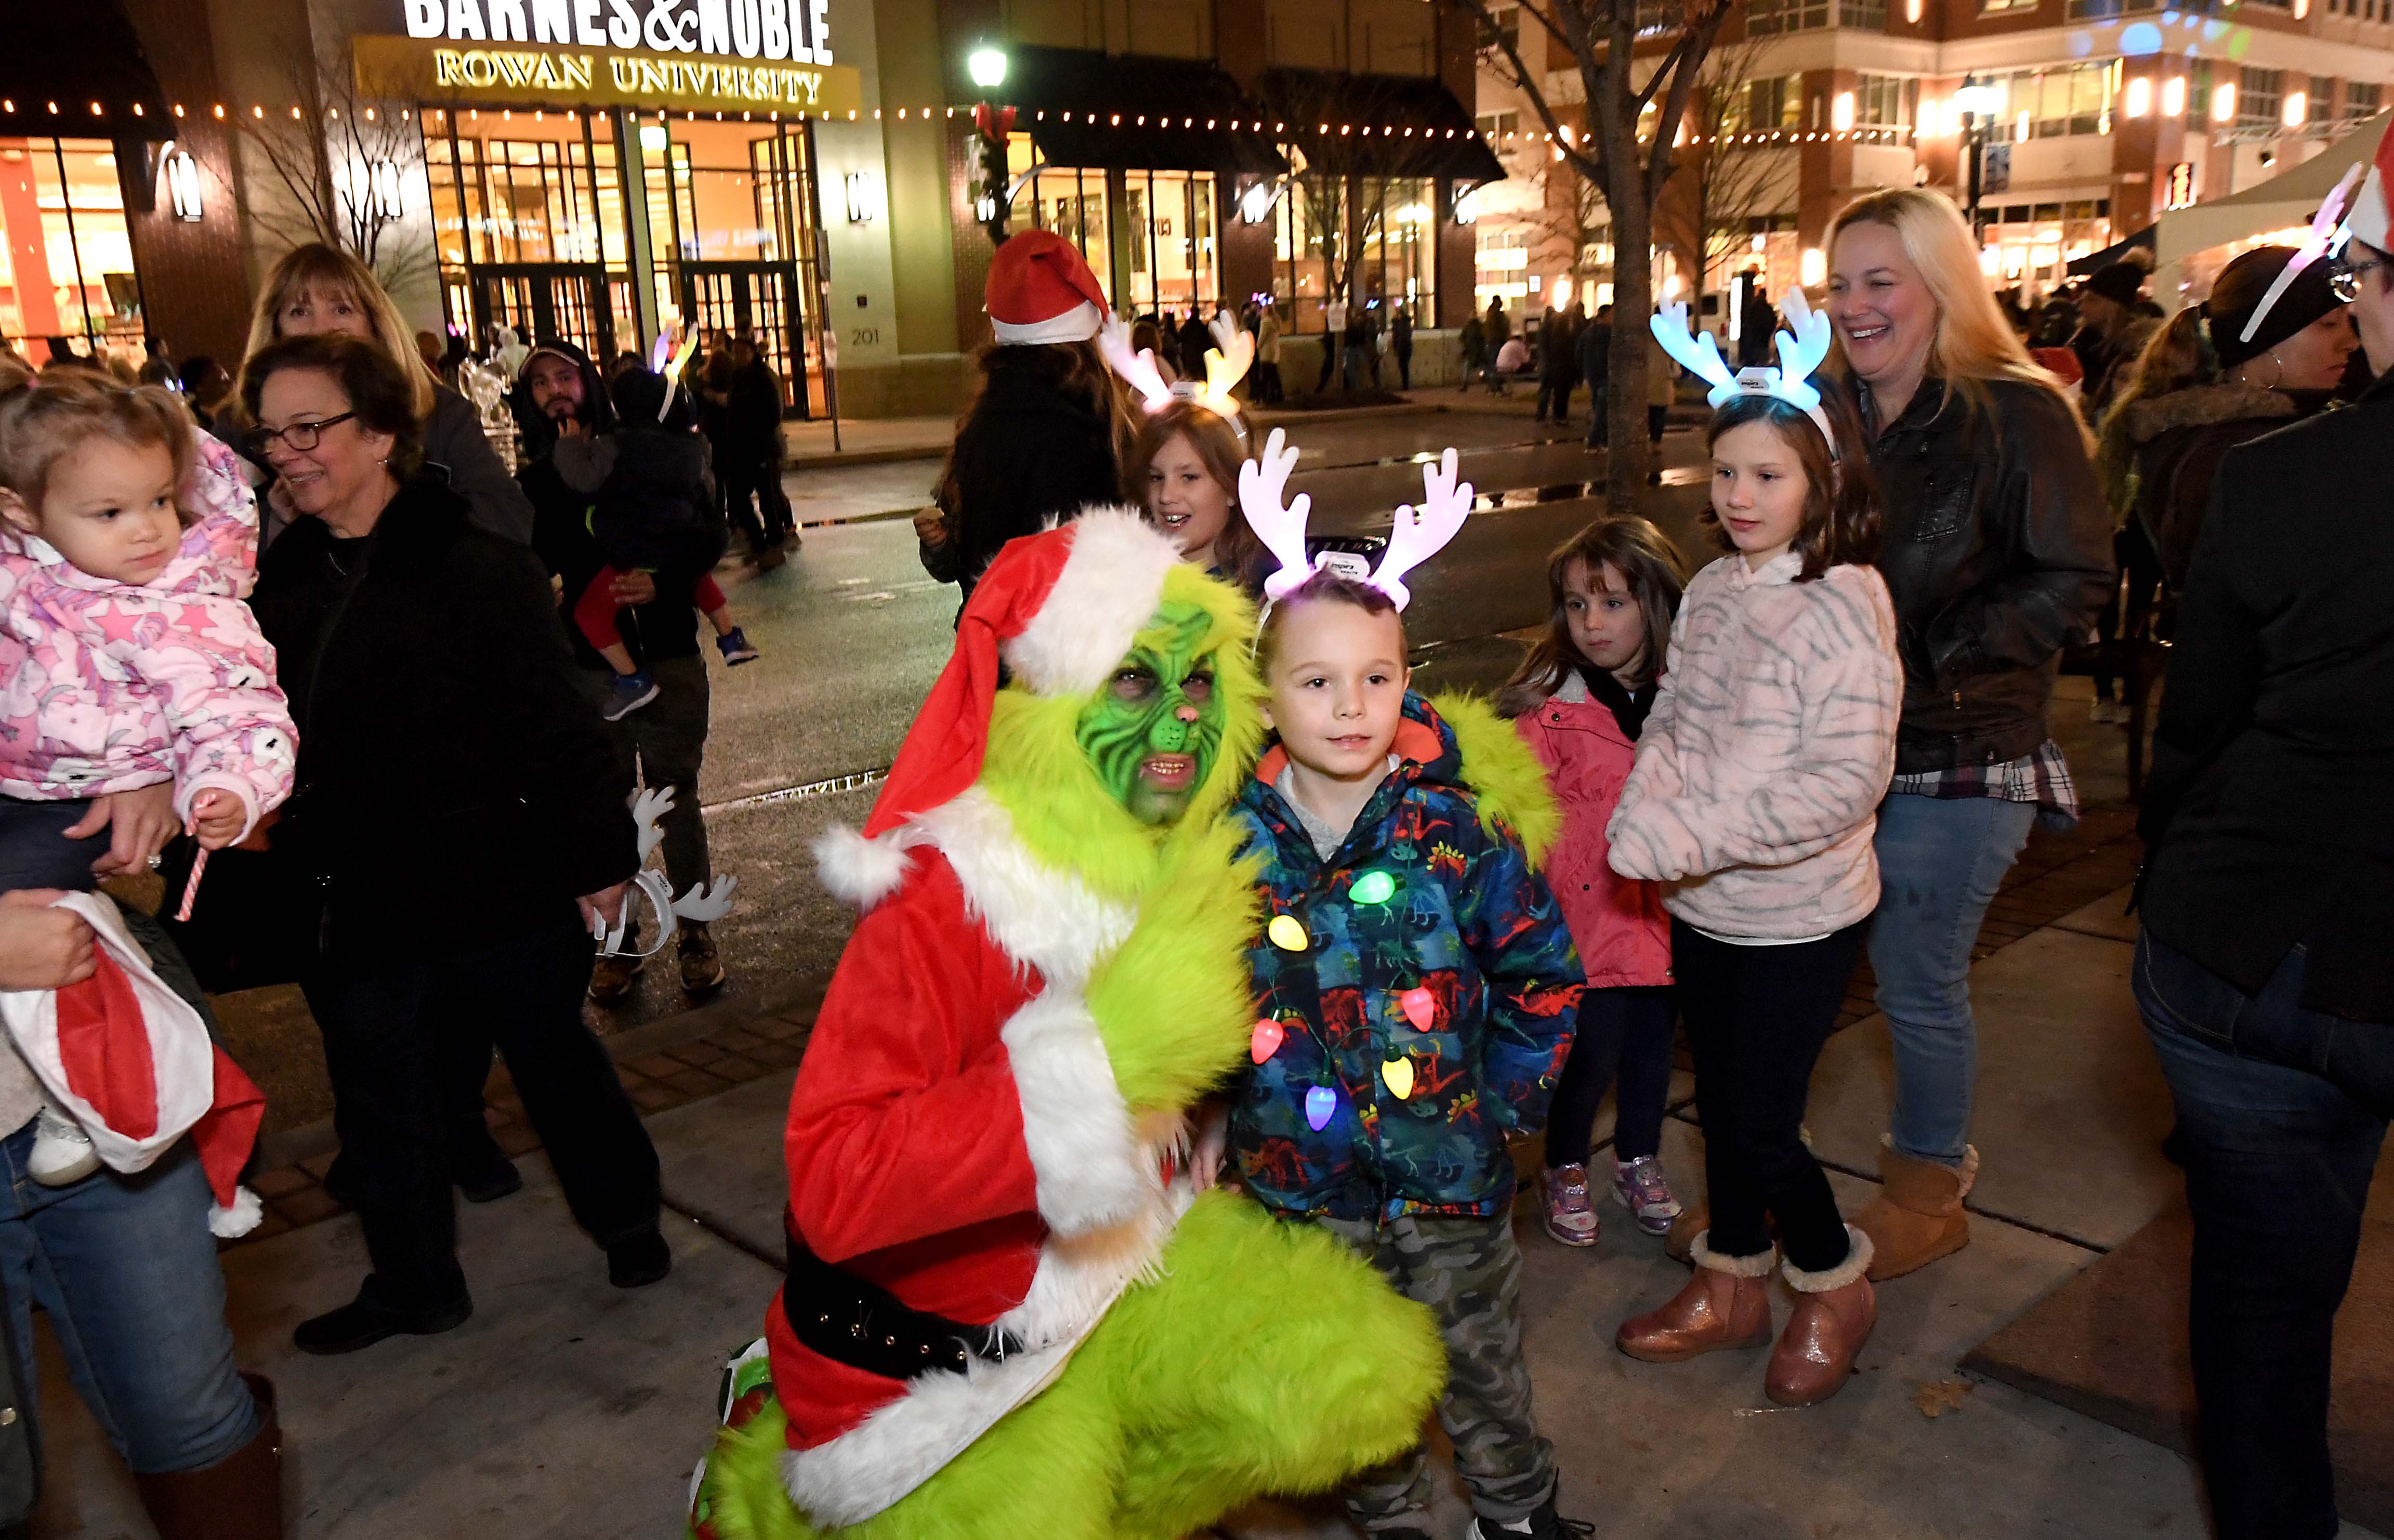 Community members pose with the Grinch as they celebrate the holiday season at the Annual Boro in Lights